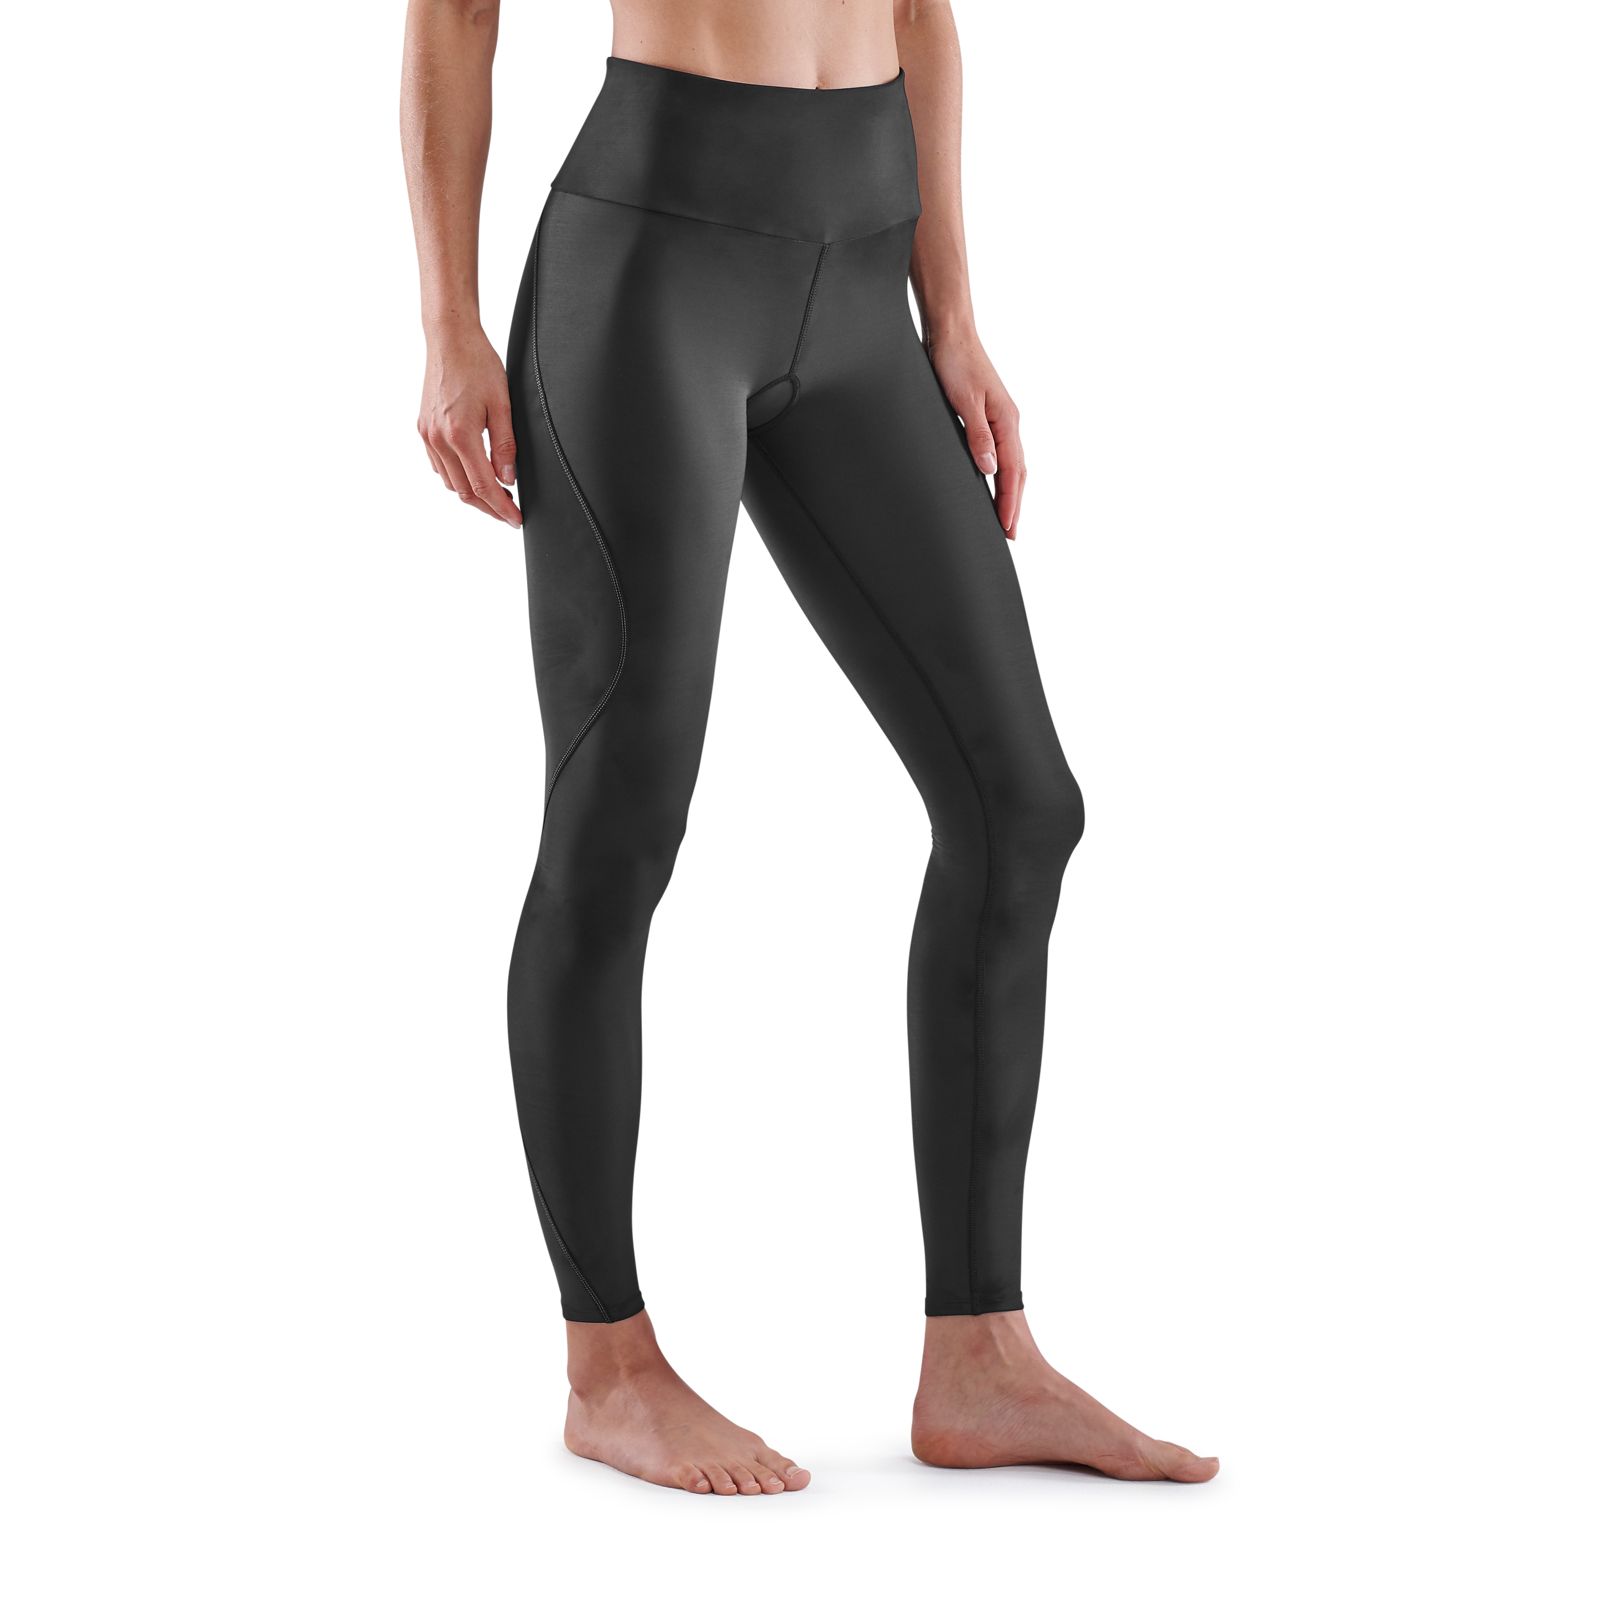 SKINS Compression 3-Series Women's Soft Long Tights - Black